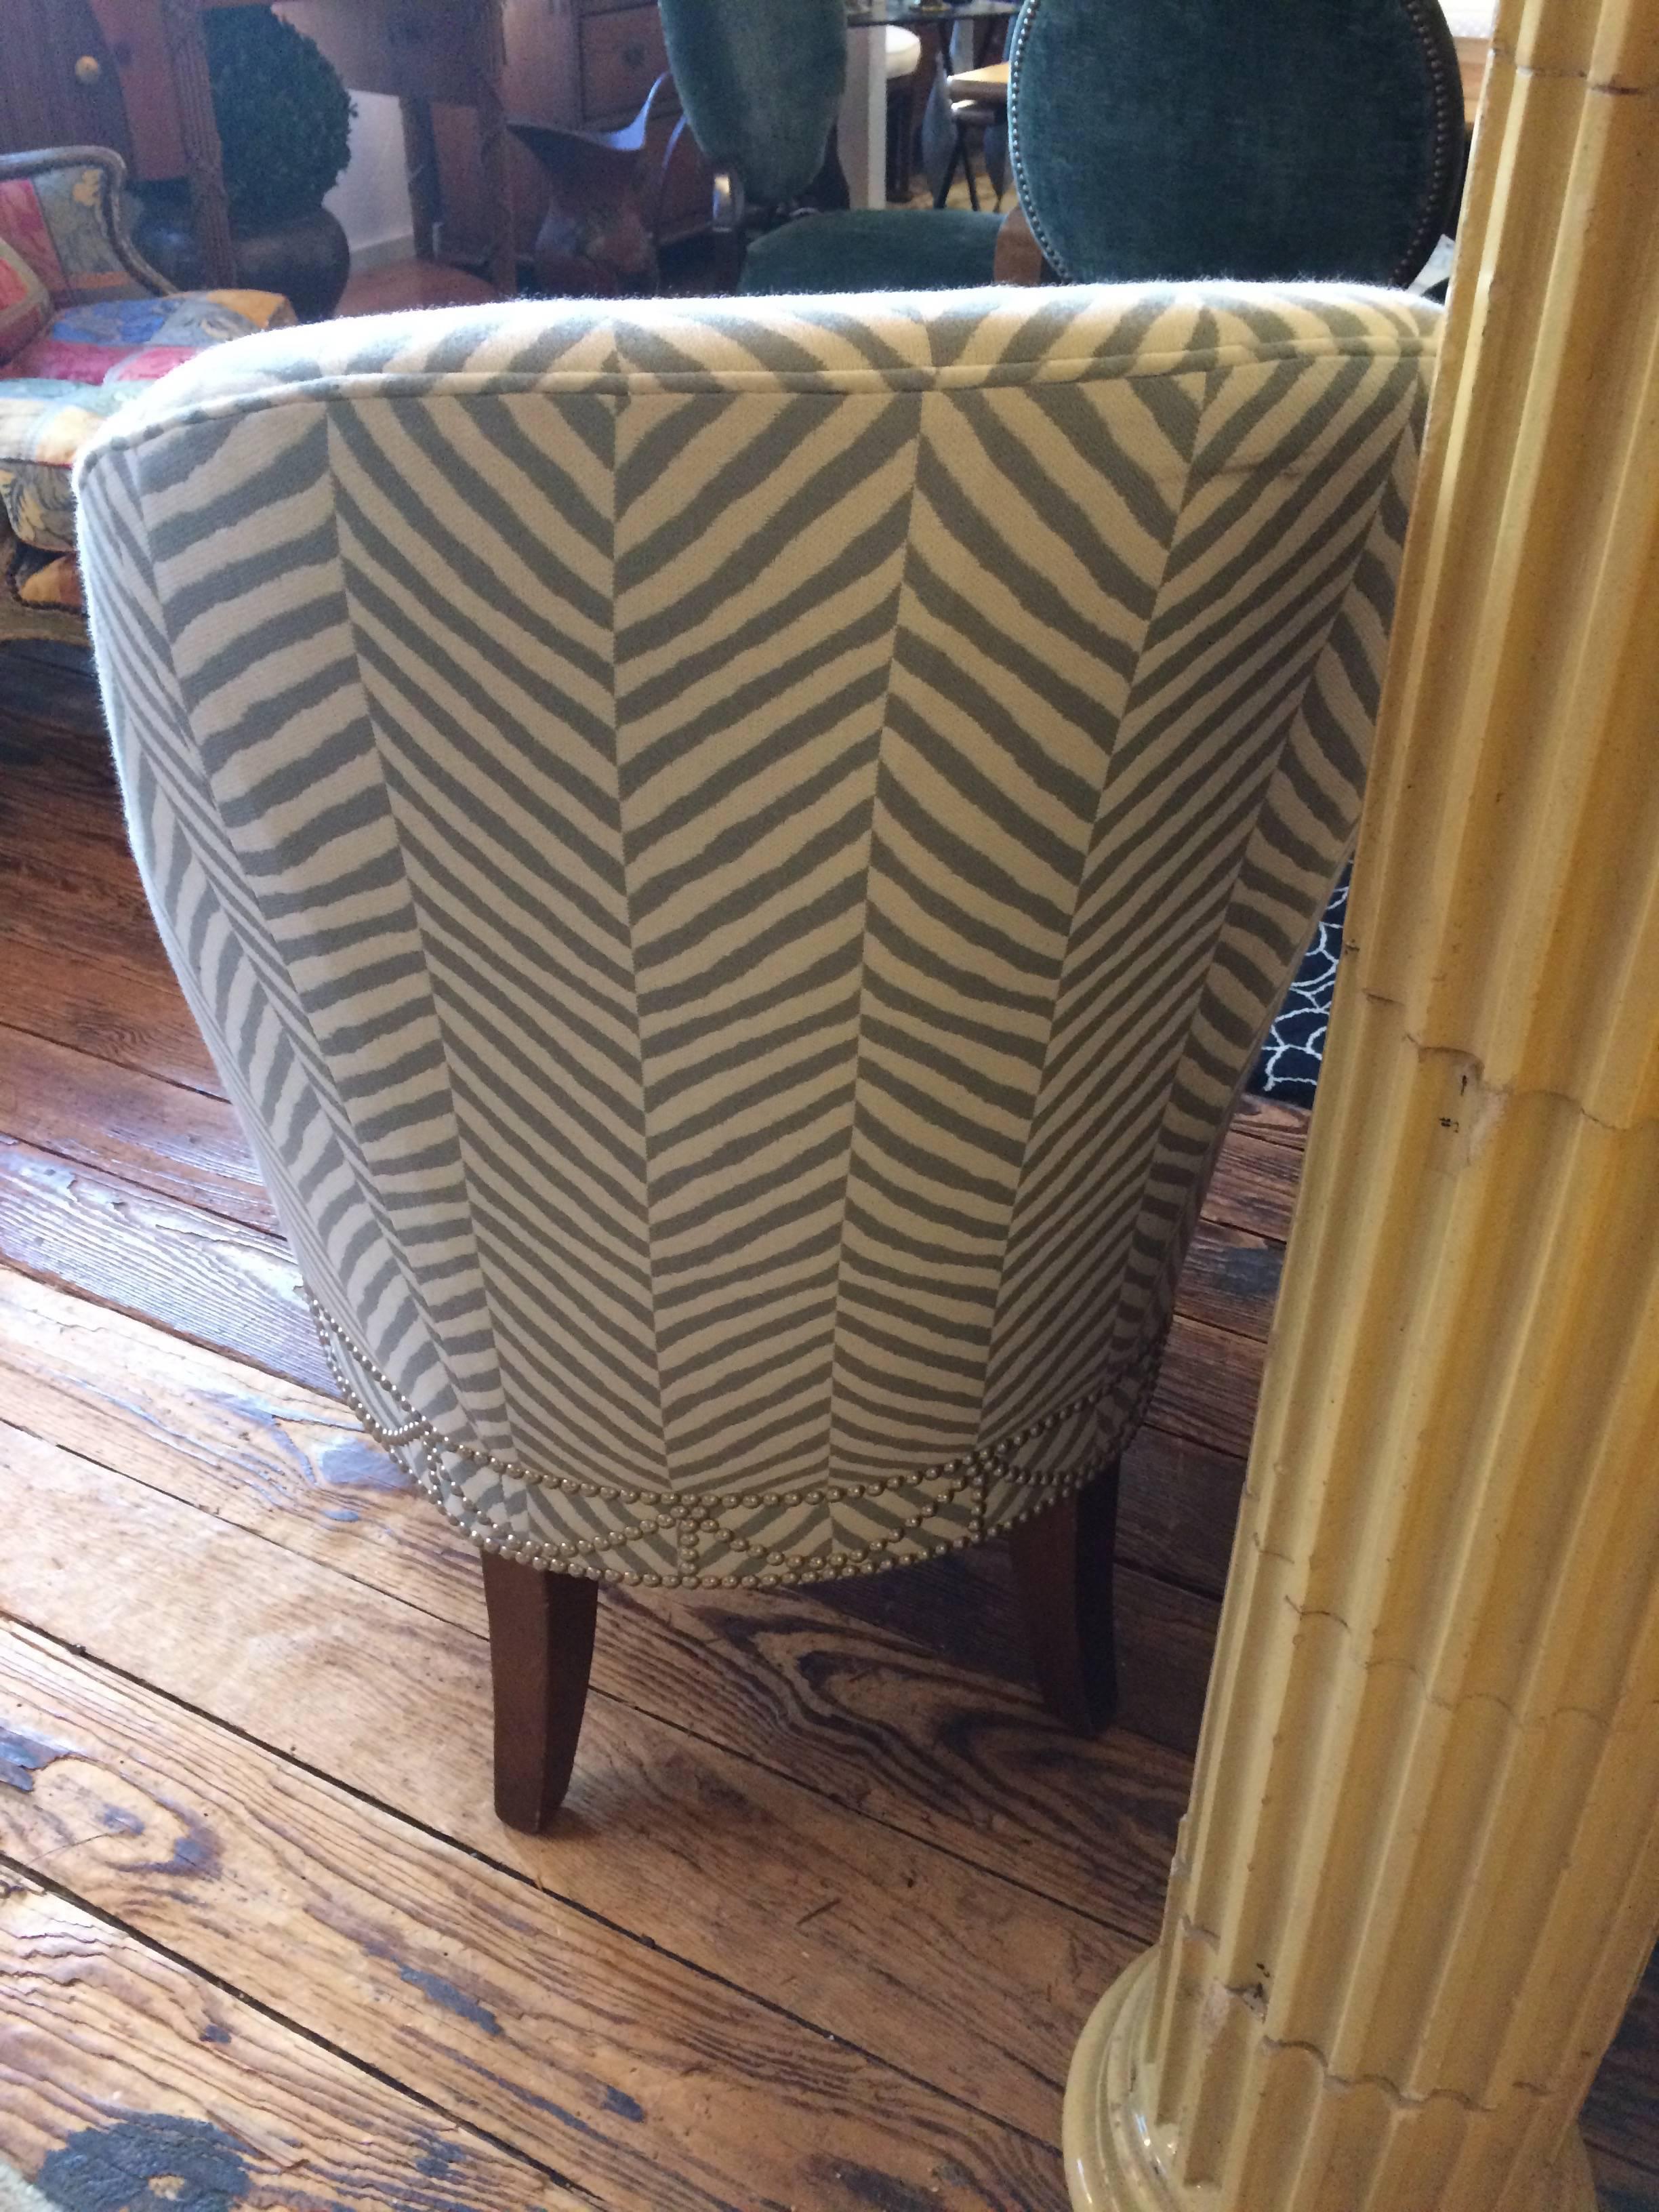 American Stunning Grey and White Chevron Upholstered Club Chair